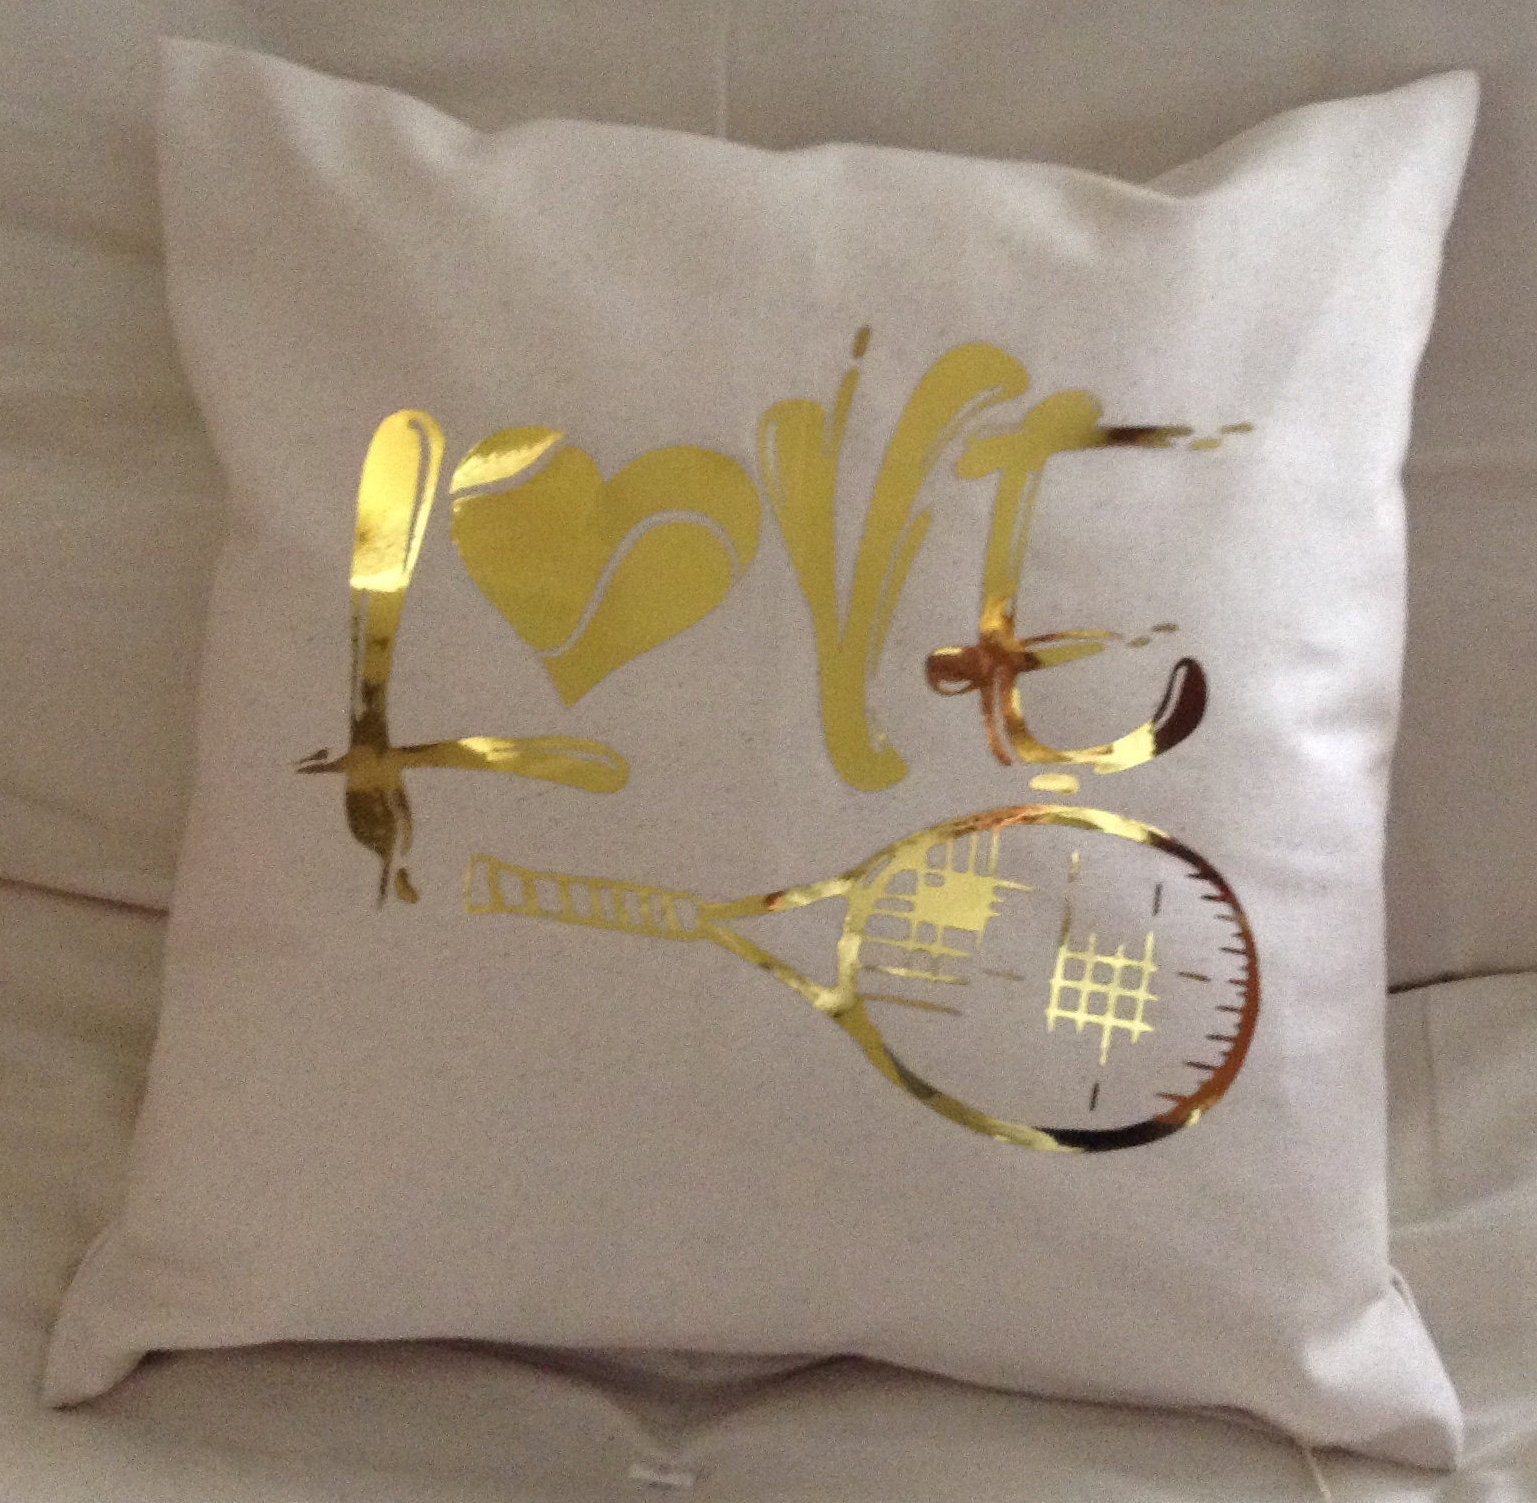 League Anniversary Gifts
 Tennis Gifts Love Tennis Pillow Valentine s Gift La s